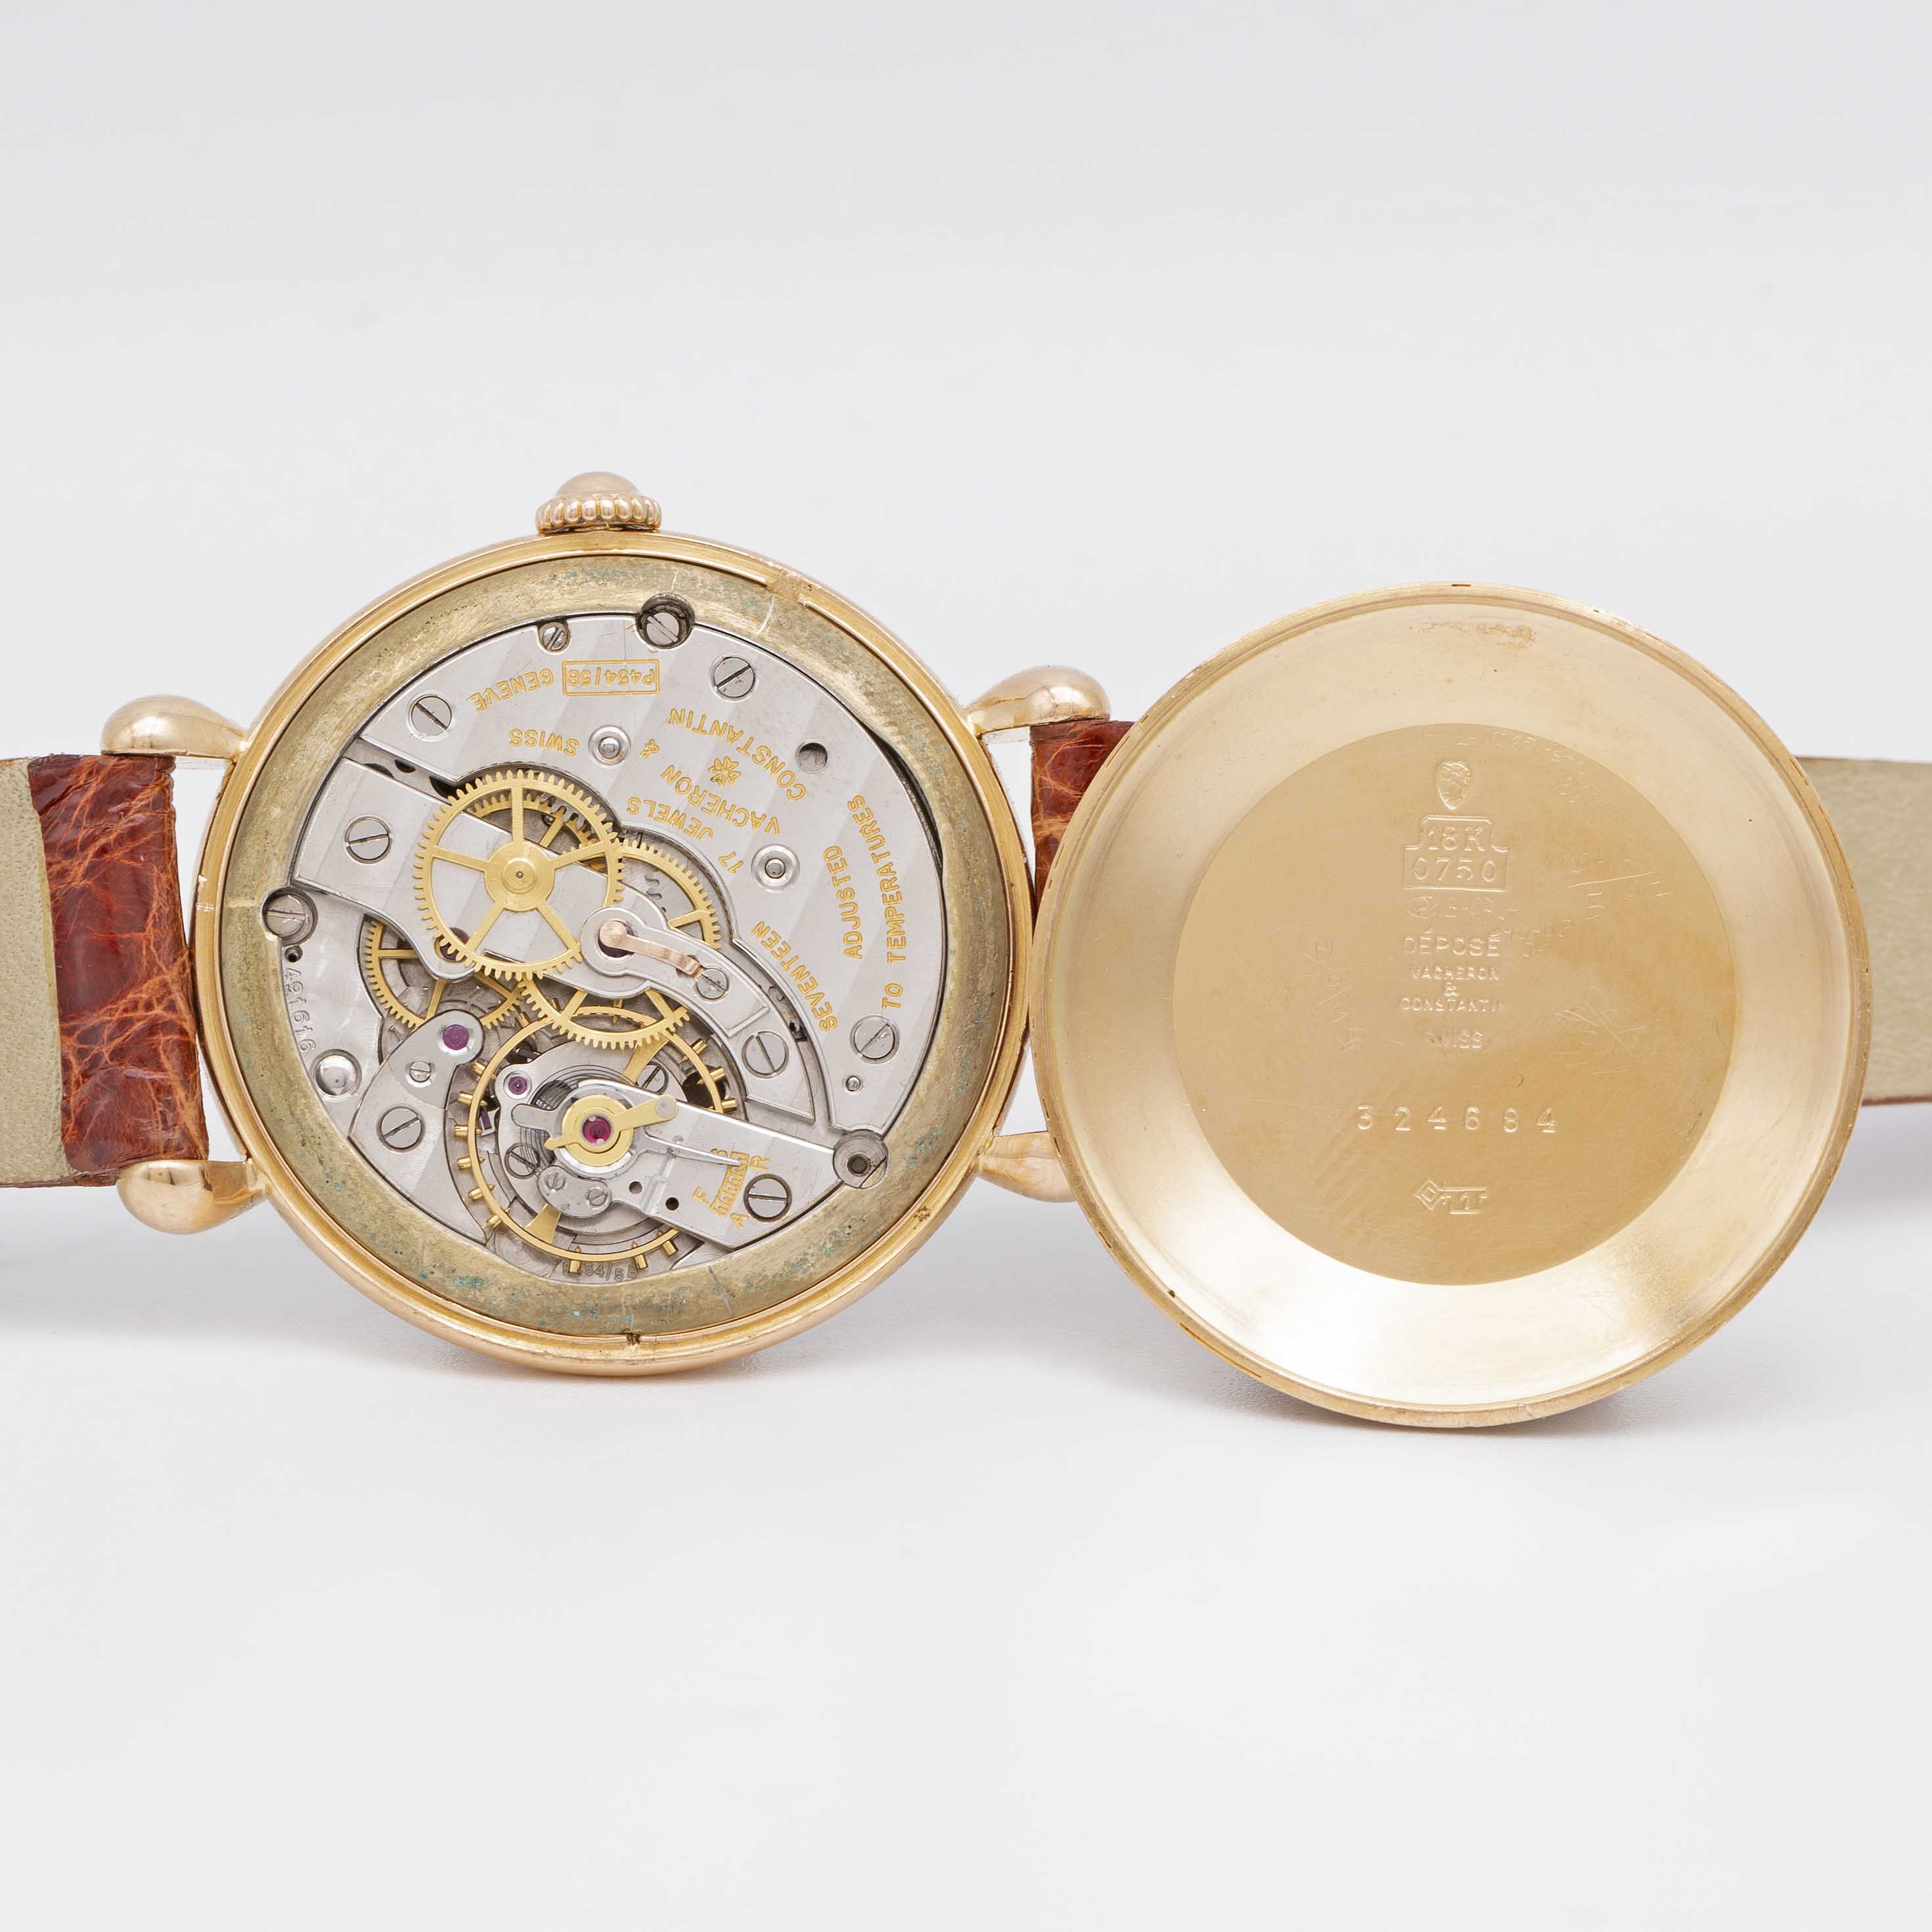 A GENTLEMAN'S 18K SOLID ROSE GOLD VACHERON & CONSTANTIN WRIST WATCH CIRCA 1950s, WITH GUILLOCHE DIAL - Image 6 of 8